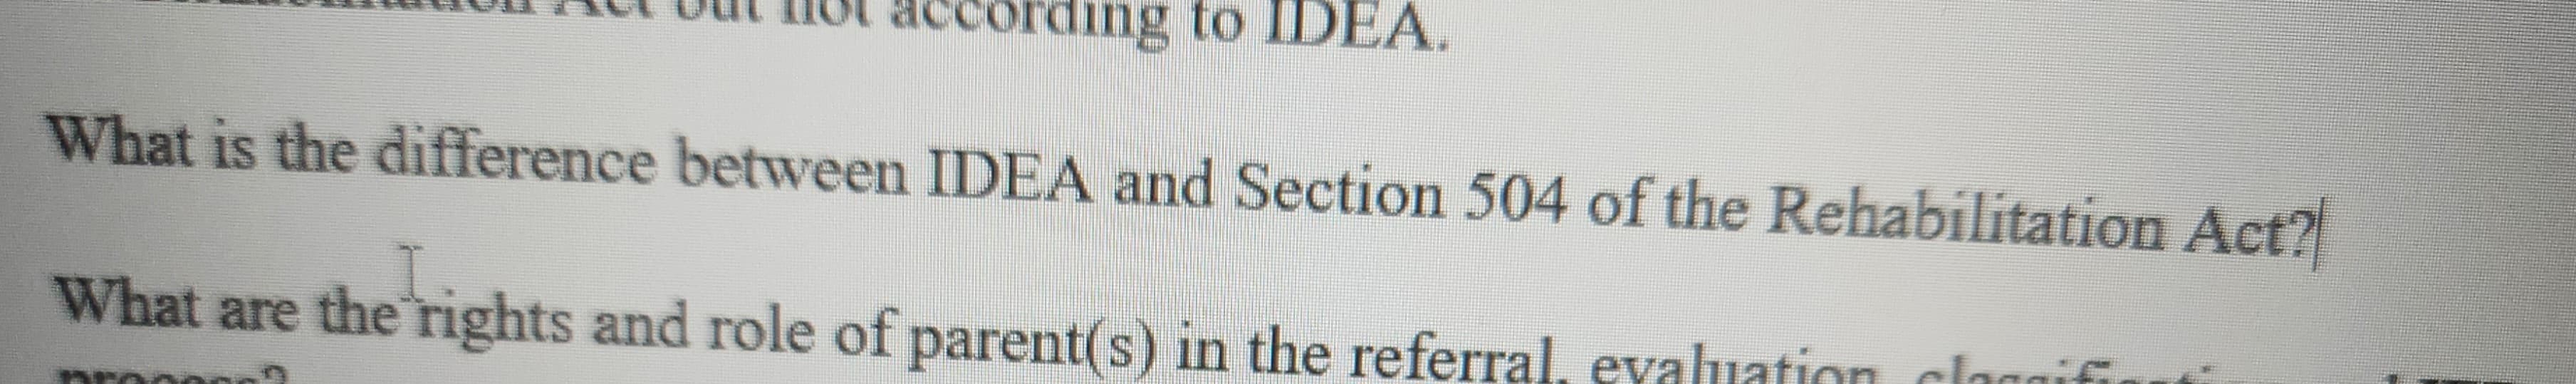 according to IDEA.
What is the difference between IDEA and Section 504 of the Rehabilitation Act?
I
What are the rights and role of parent(s) in the referral, evaluation classifi